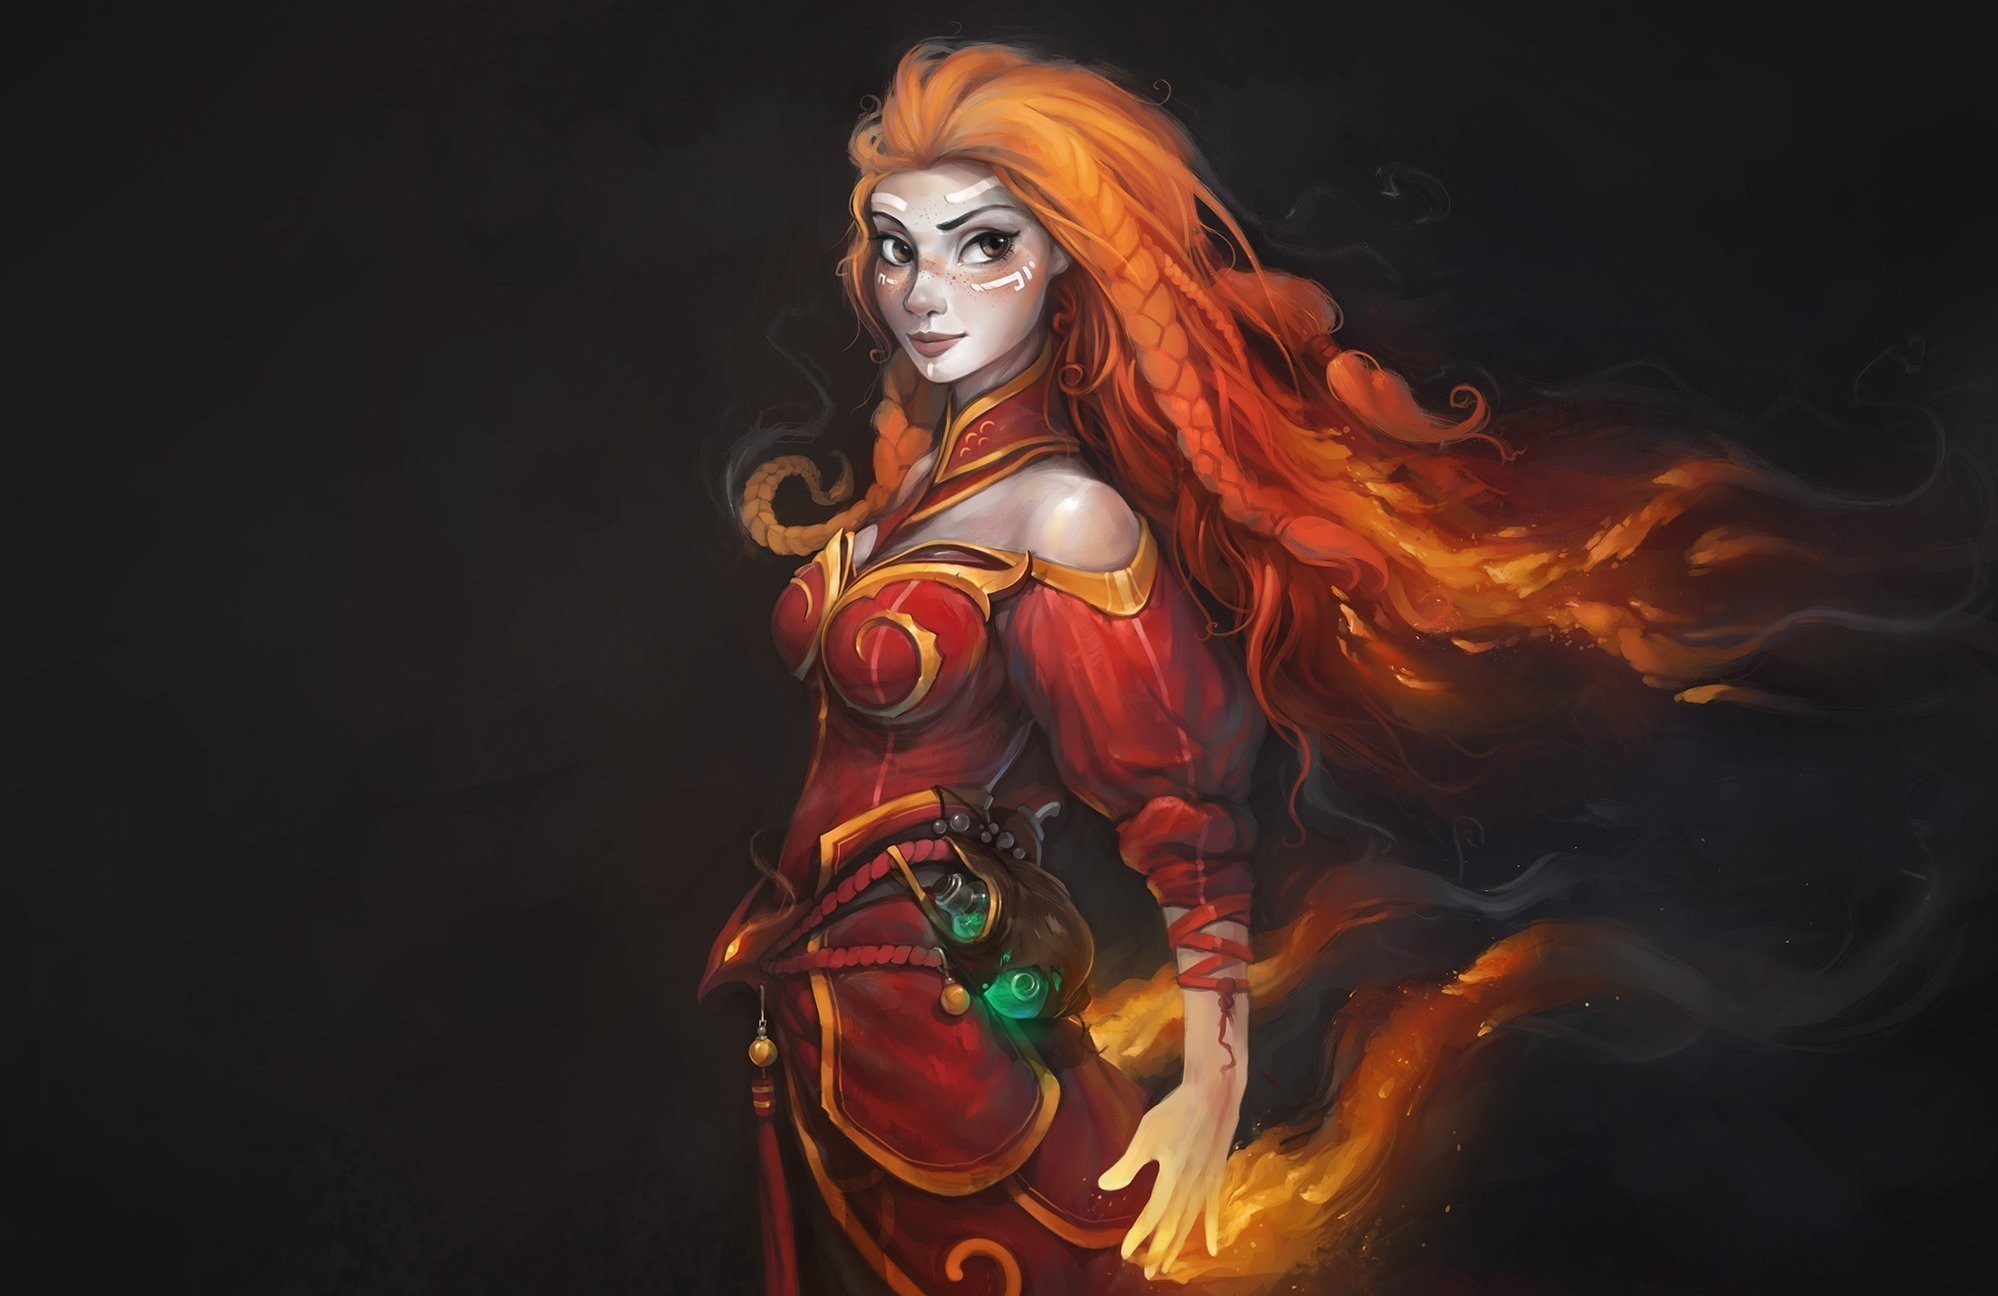 General 1998x1296 Dota 2 Lina Inverse fantasy girl video games video game art video game girls redhead long hair simple background black background dress red dress standing PC gaming fantasy art Lina (Dota 2)